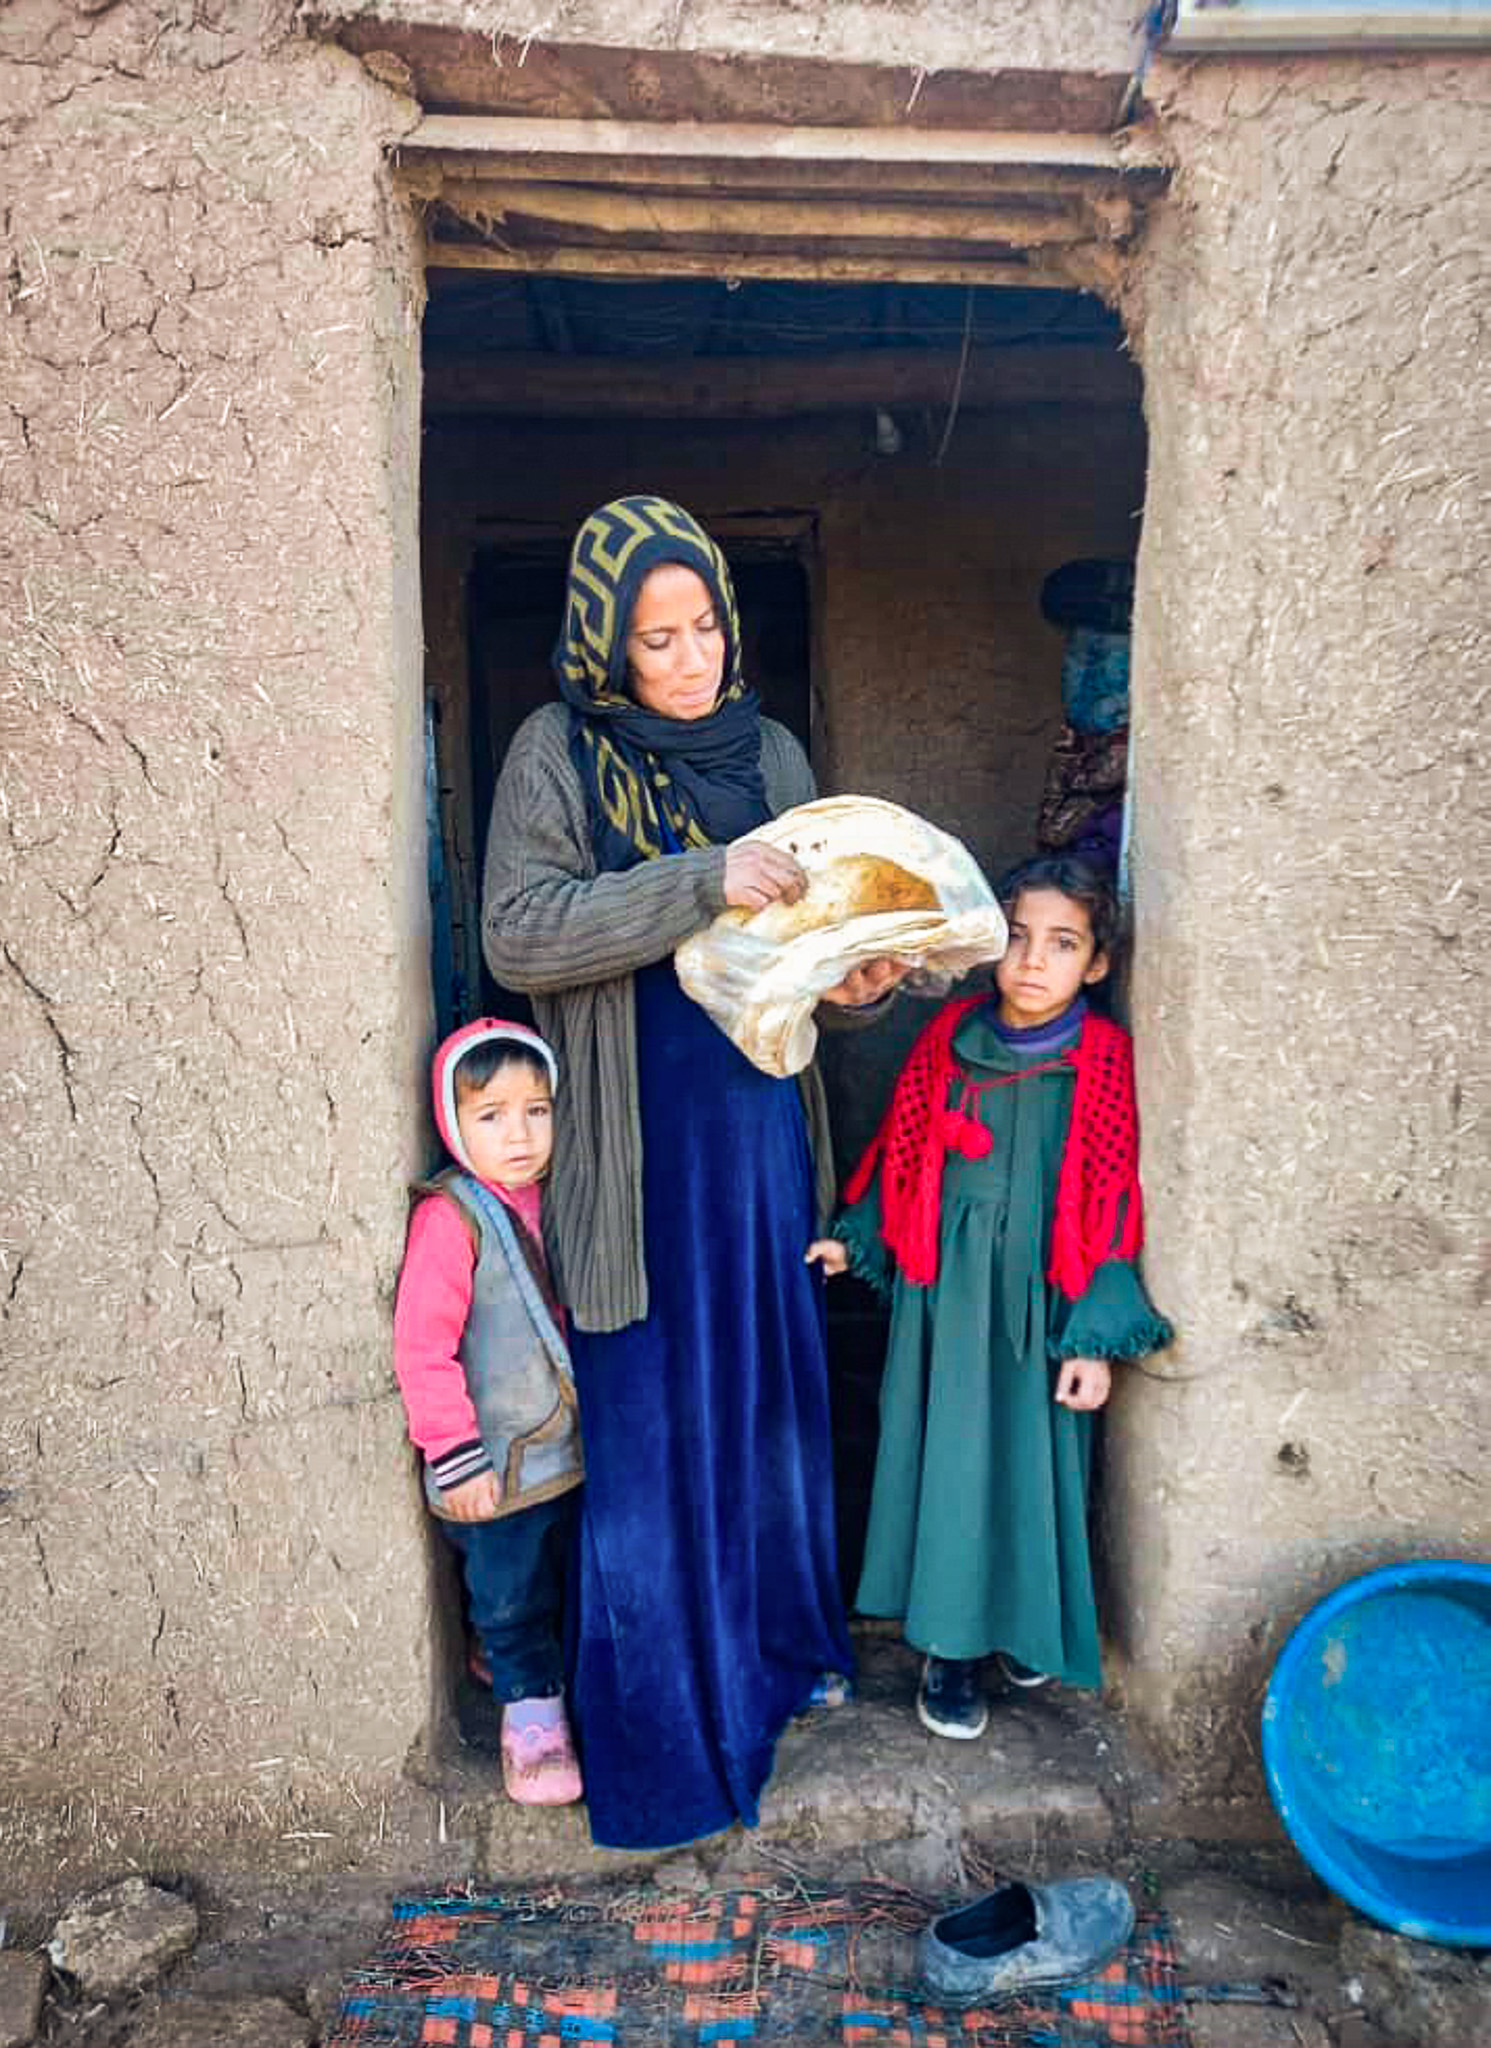 a woman in a hijab stands in a doorway with two children while holding bread